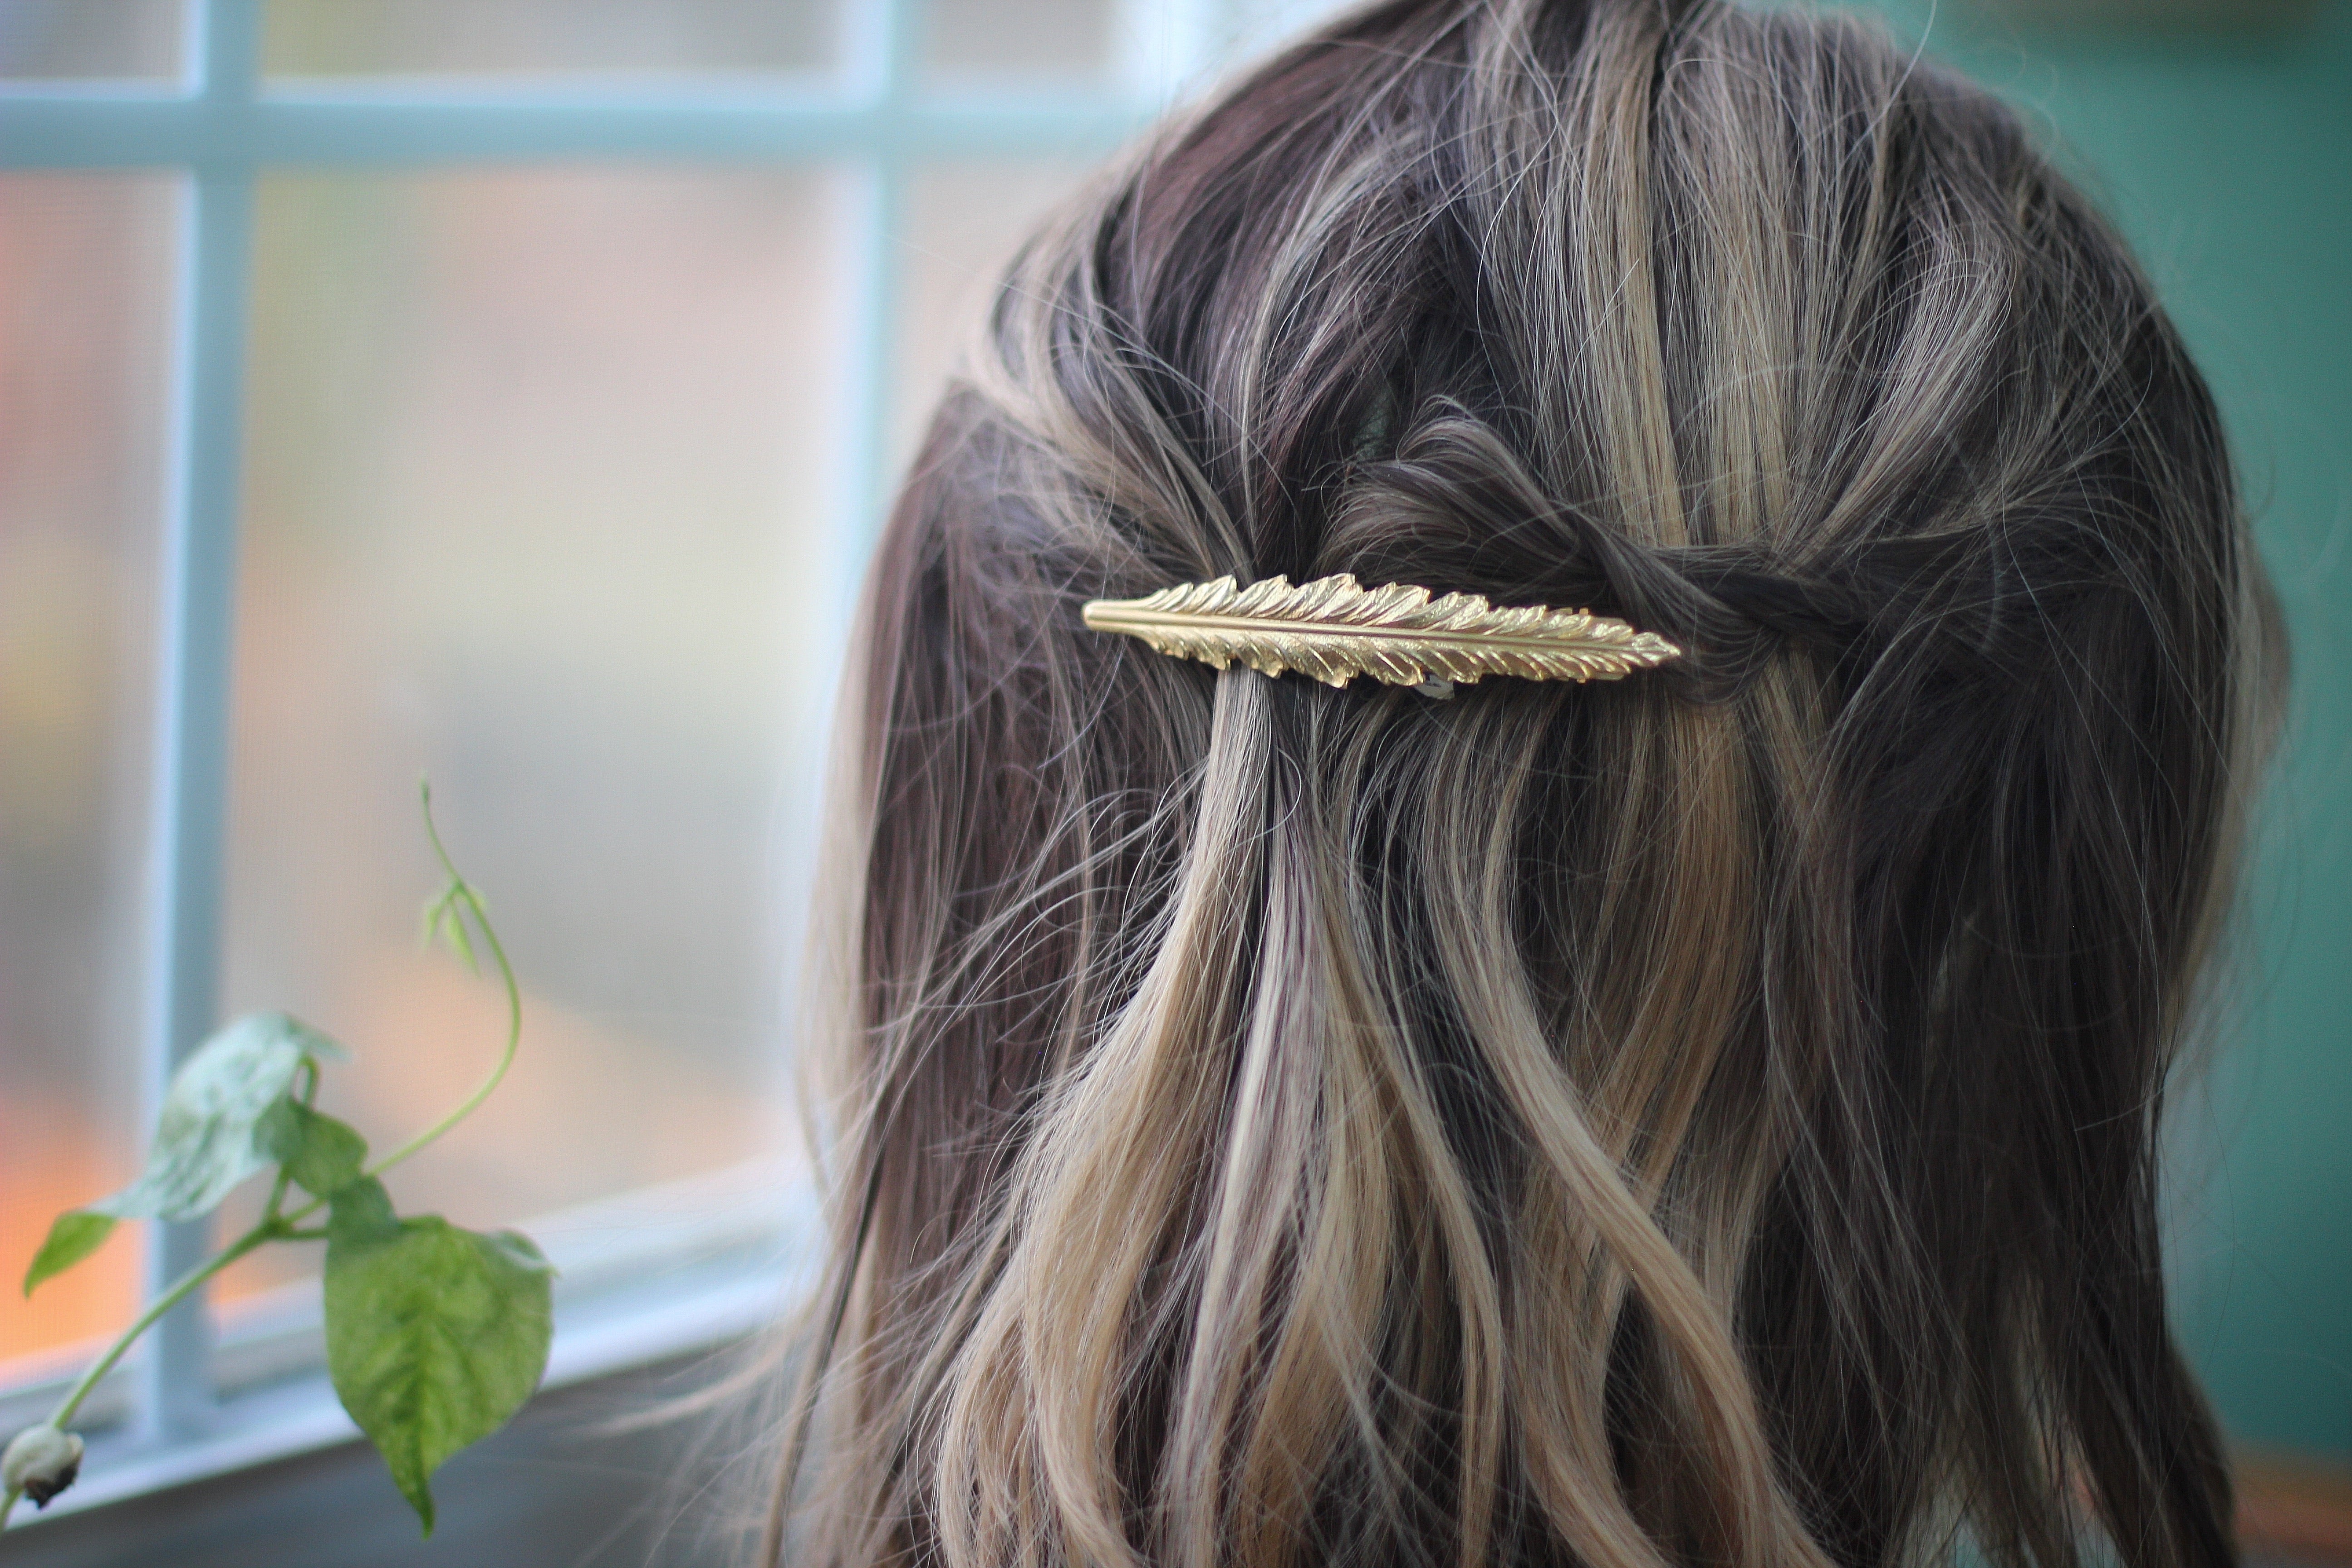 Discounted Version - Indian Feather Barrette